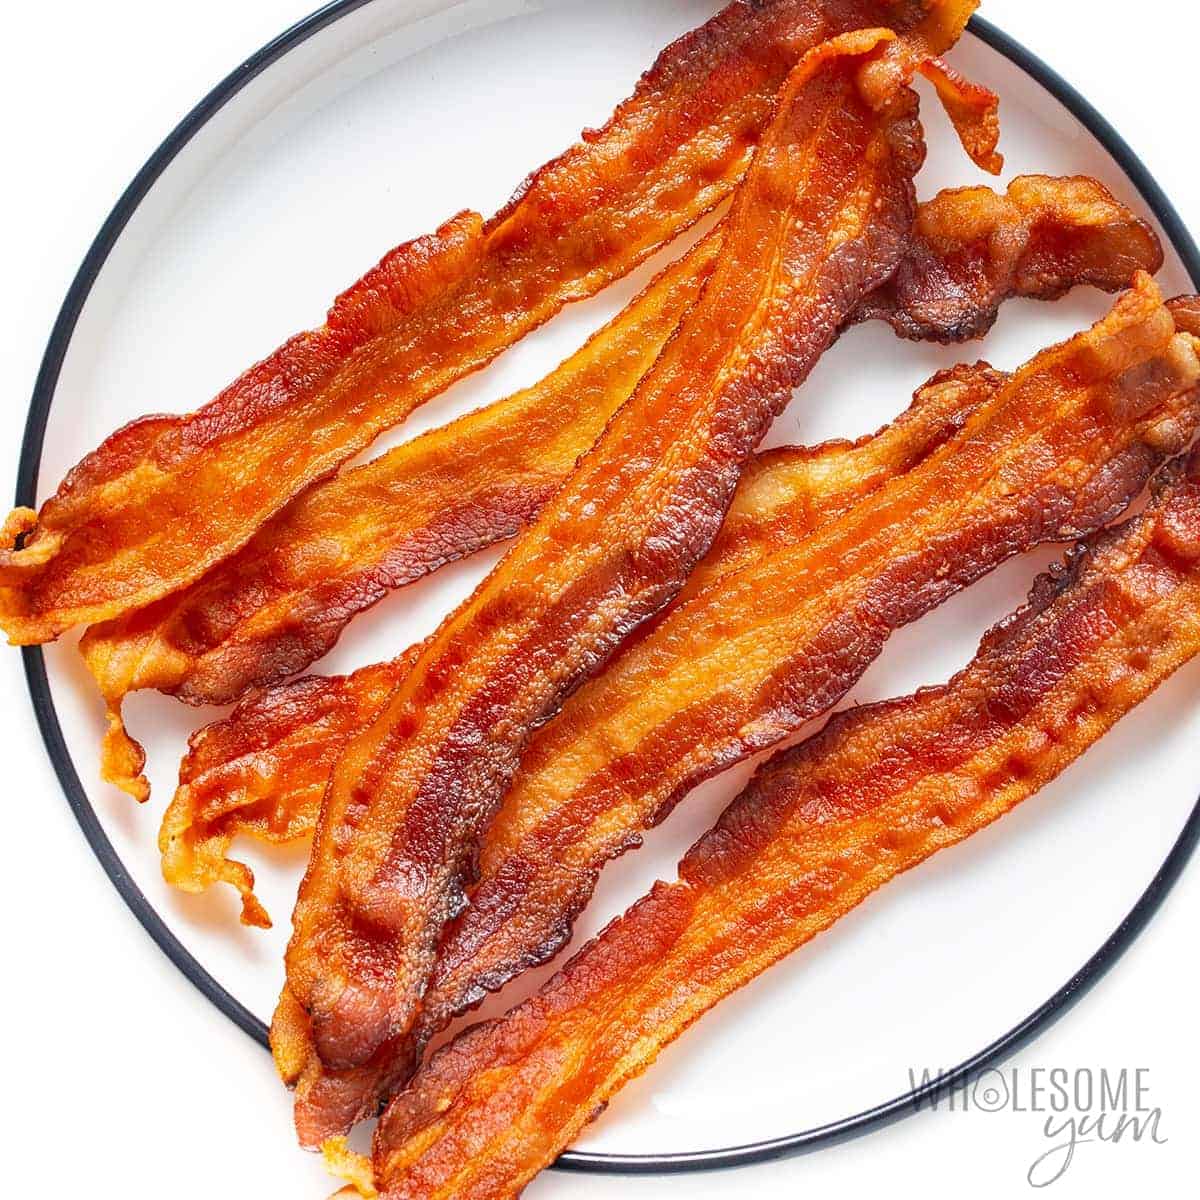 Microwave bacon on a plate.